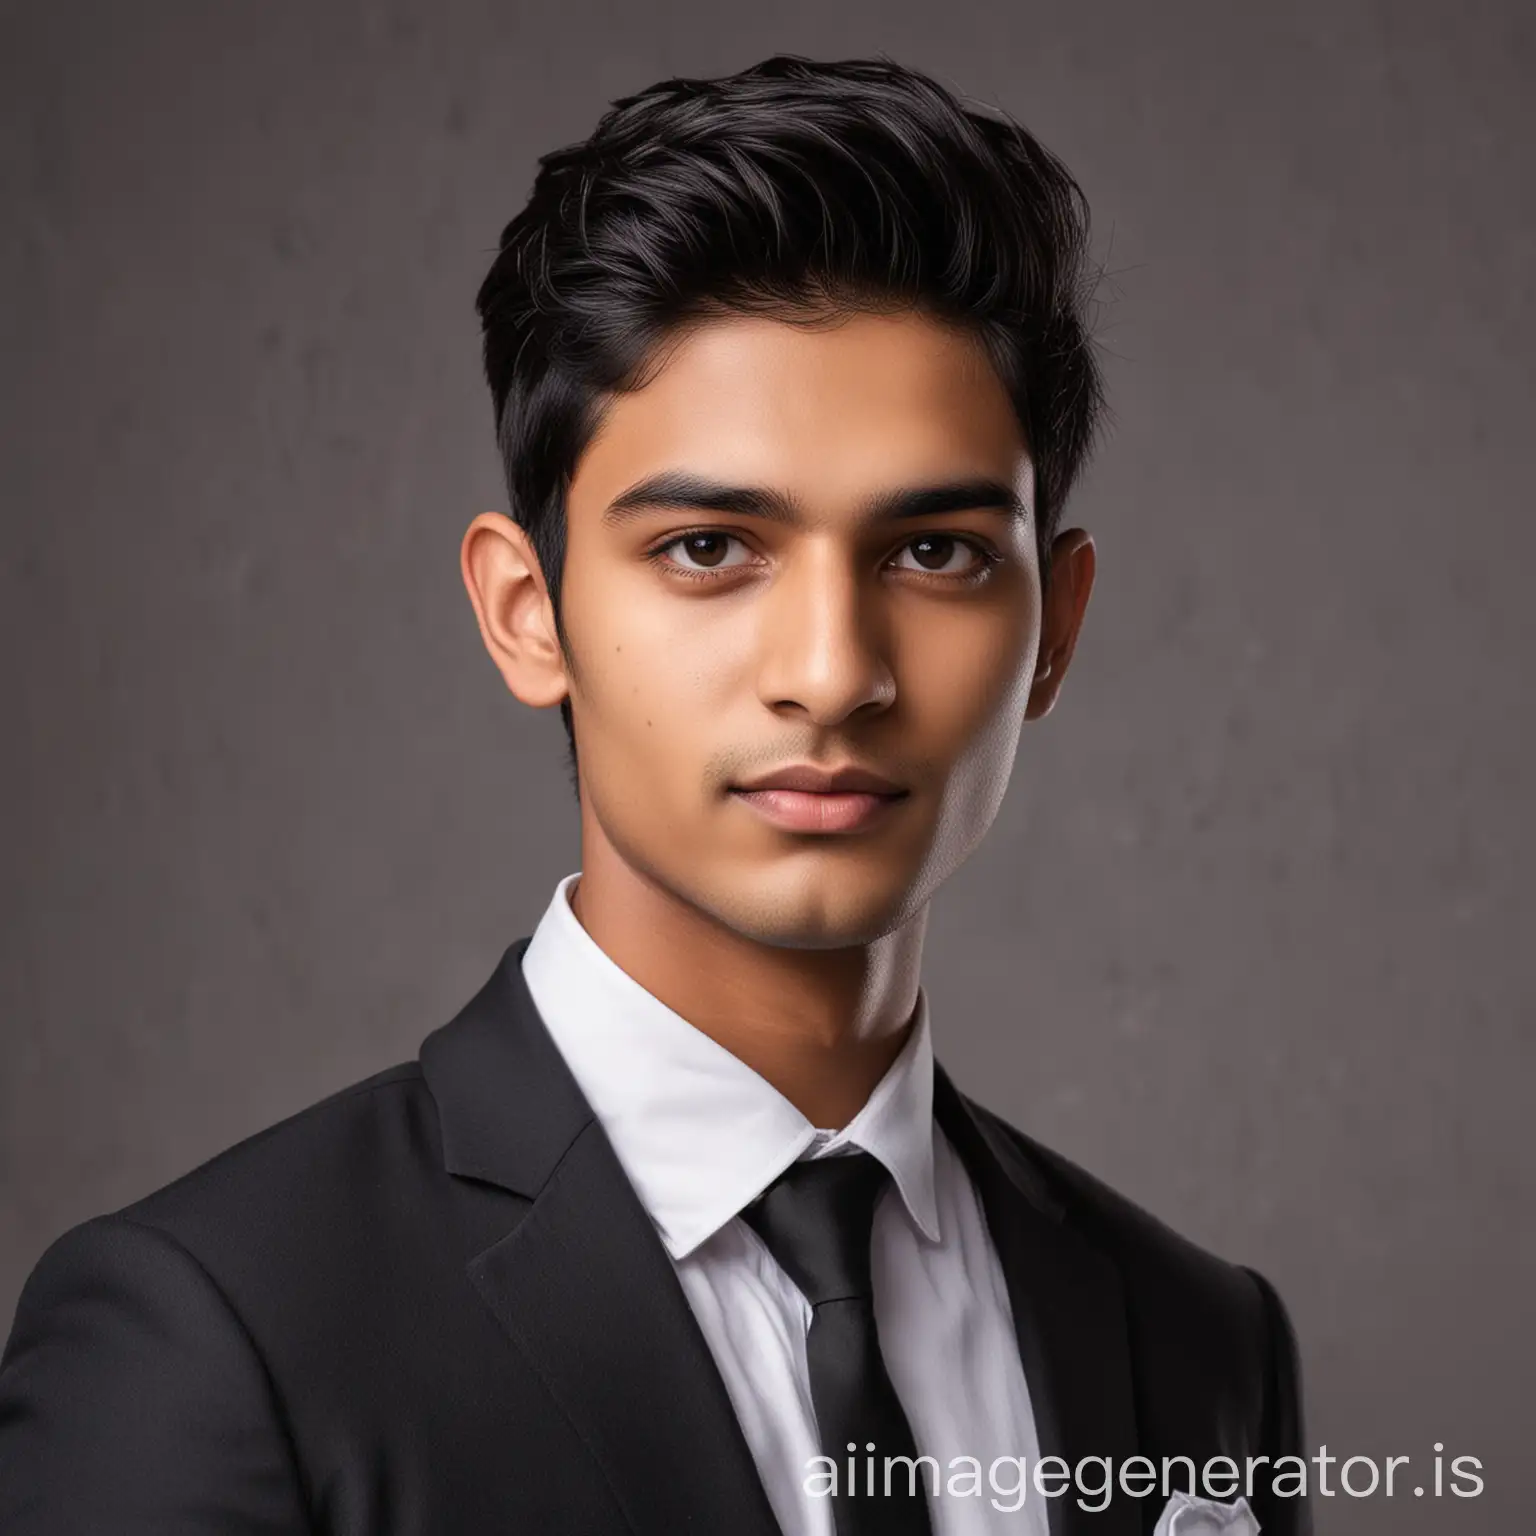 27 year old Indian teen male slightly acne scar fair skin with skinny neck slightly lighter tone posing for a LinkedIn photo in formal wear with one side cropped hair style